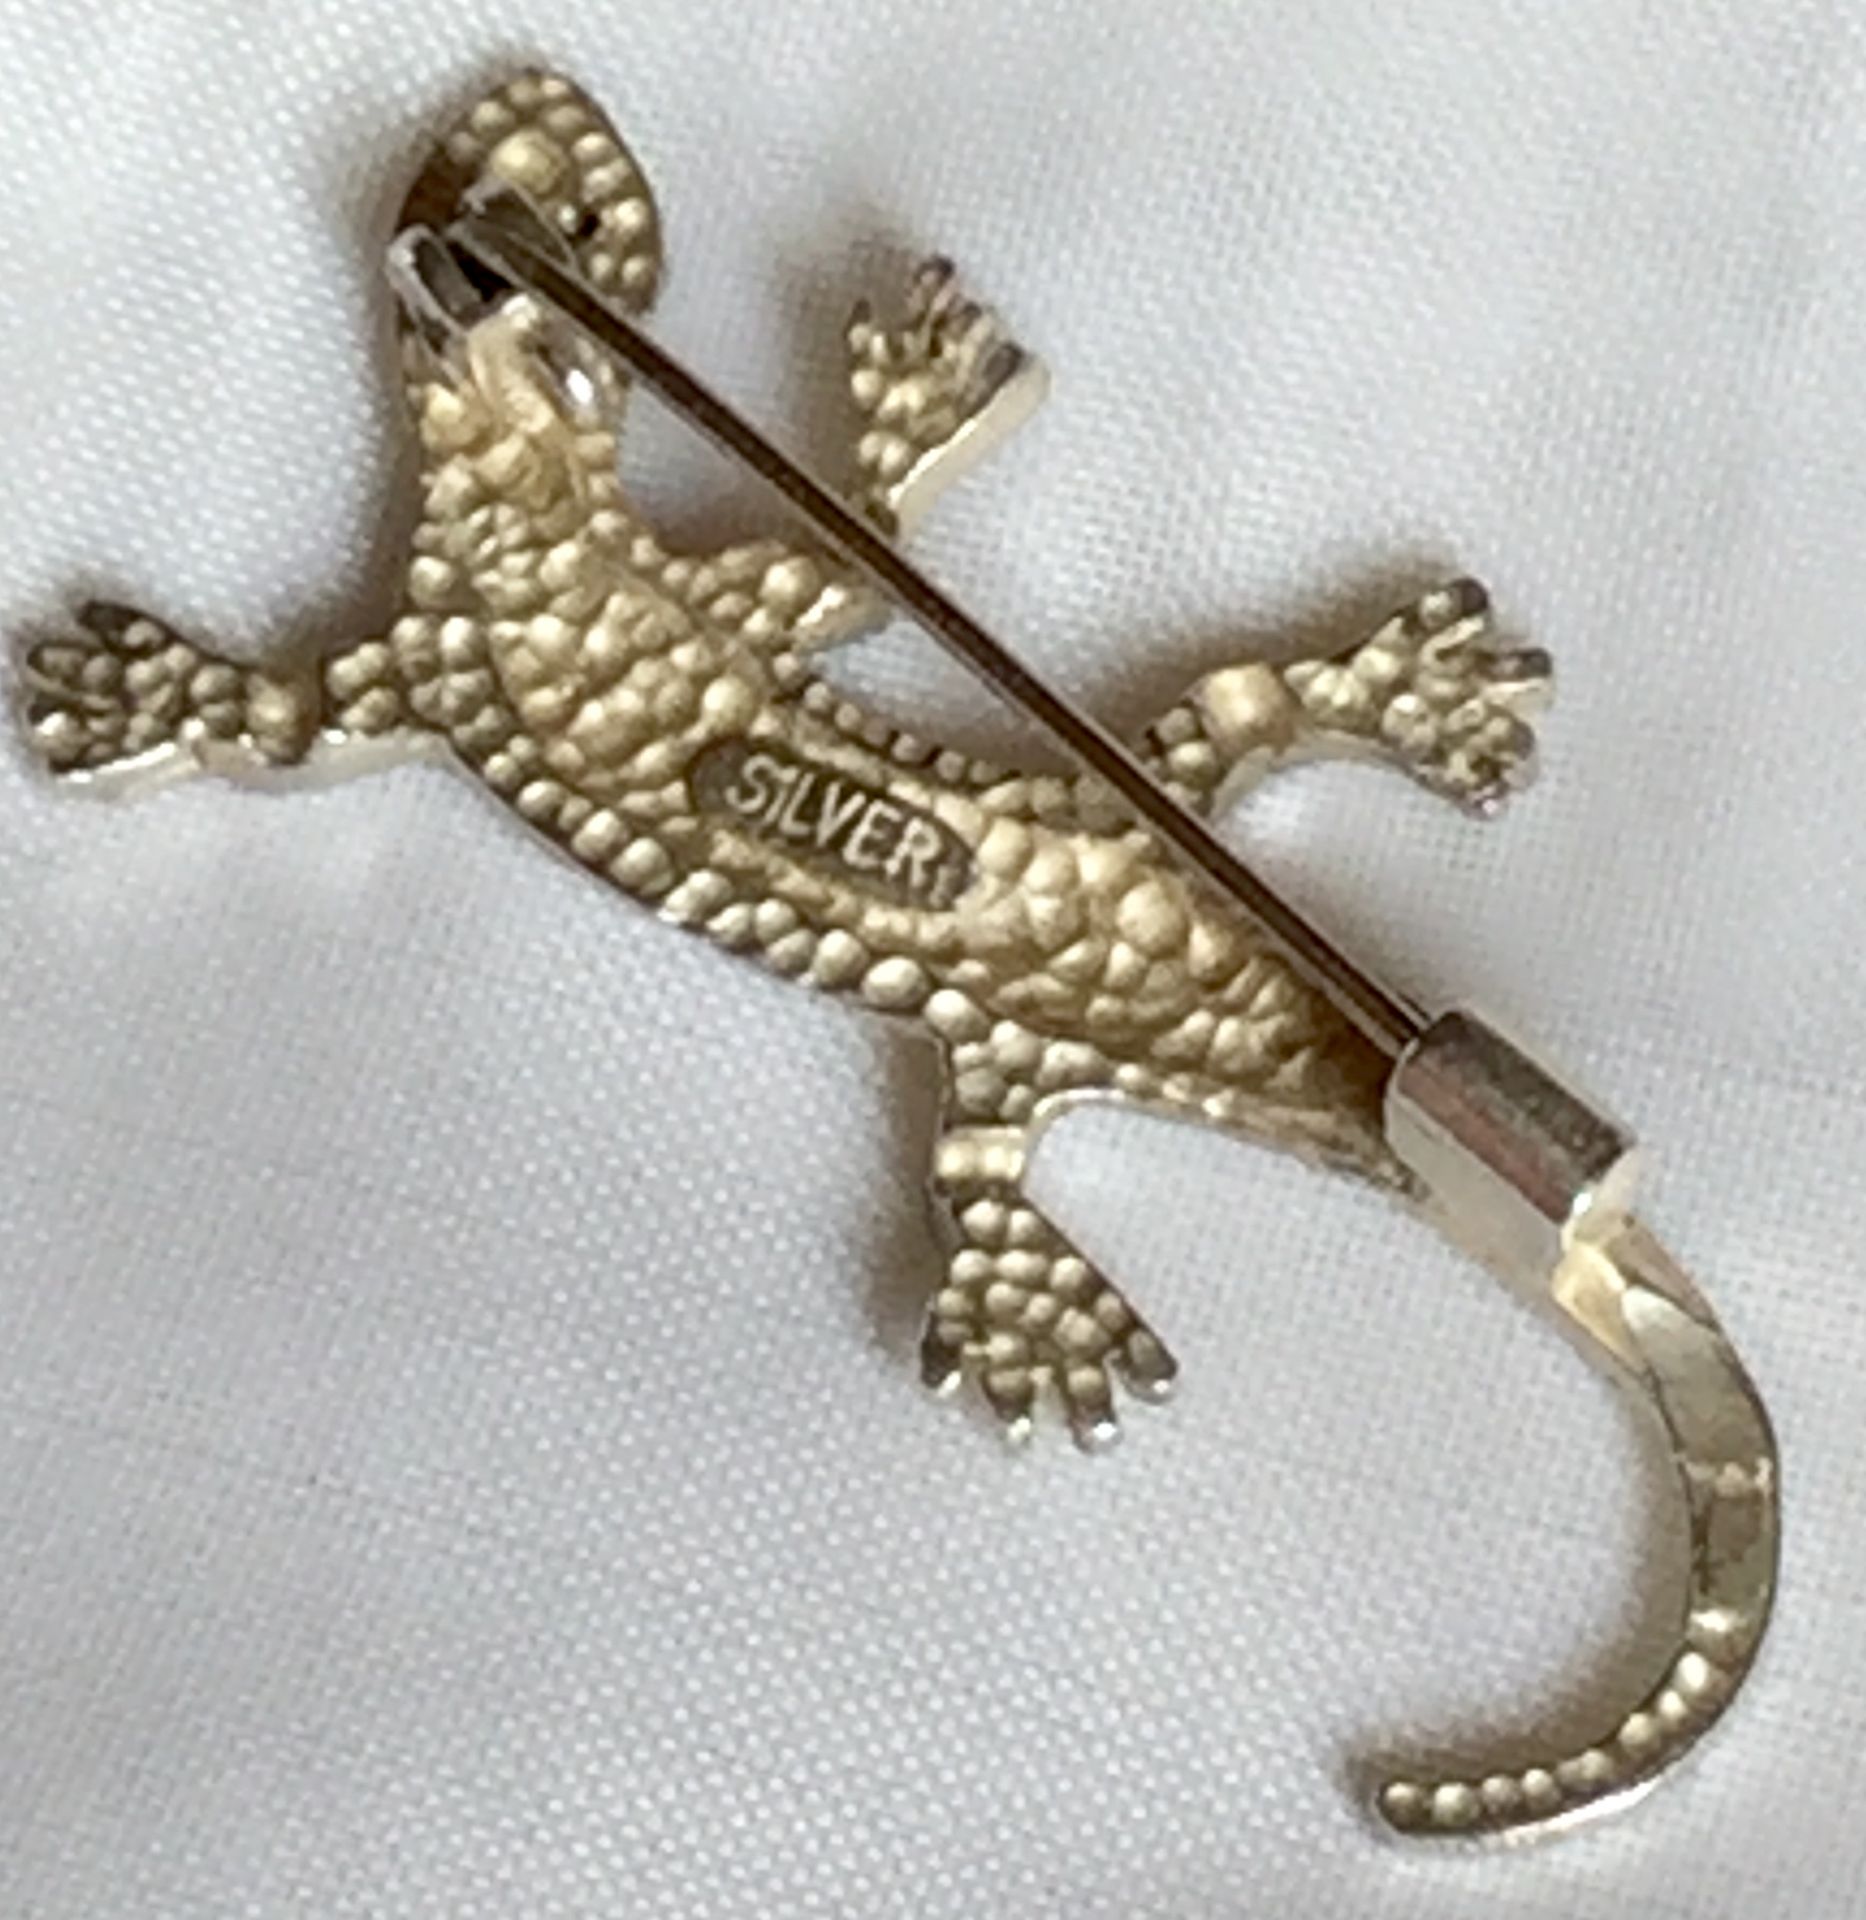 Silver Vintage Lizard Brooch with sparkly onyx eyes 4.10 grams - Image 2 of 7